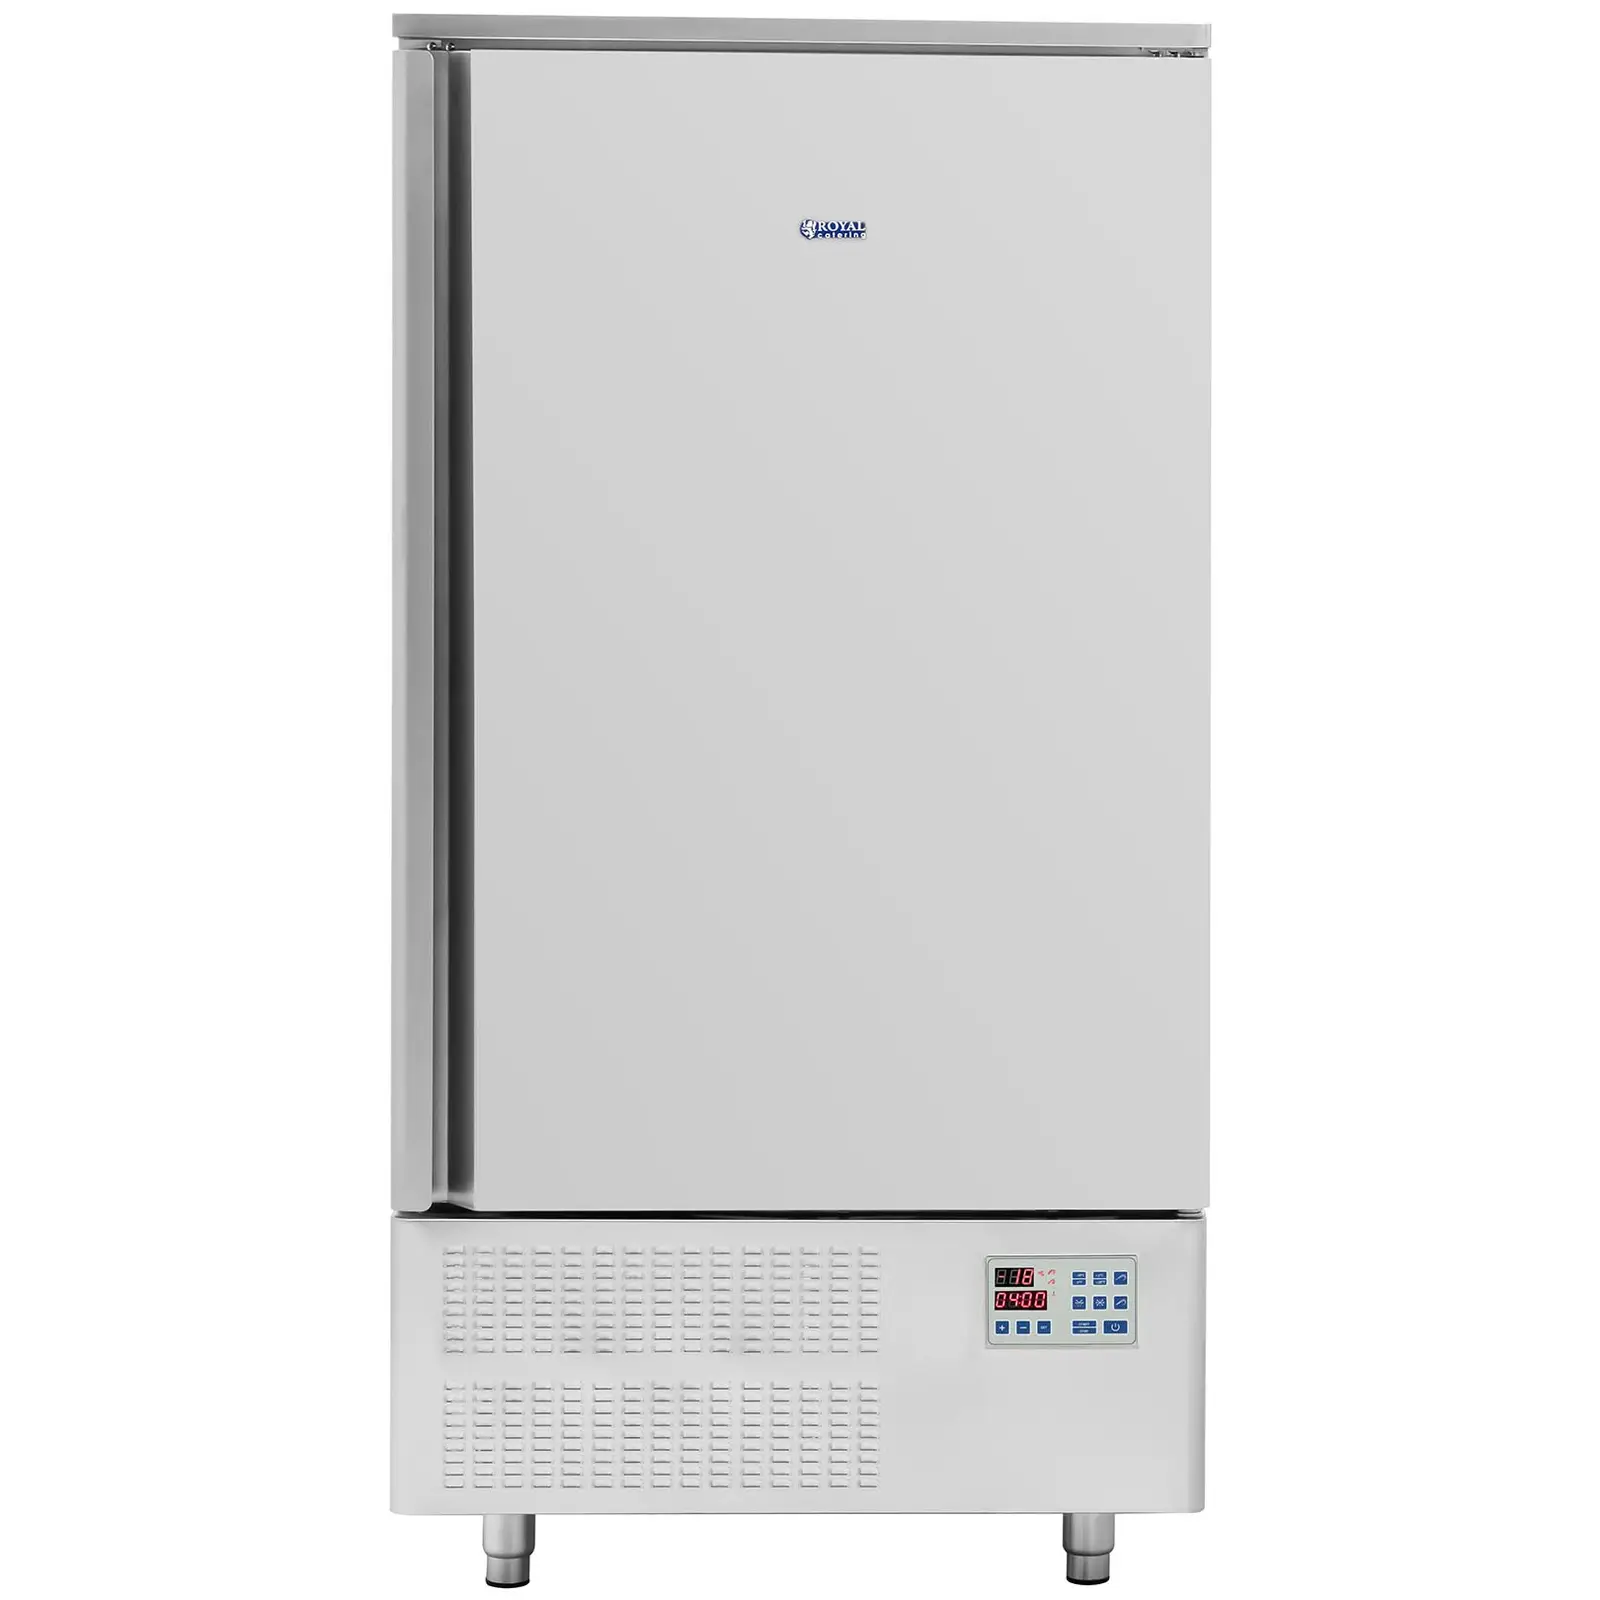 Blast Chiller - 276 L - Royal Catering - cooling and freezing function - stainless steel